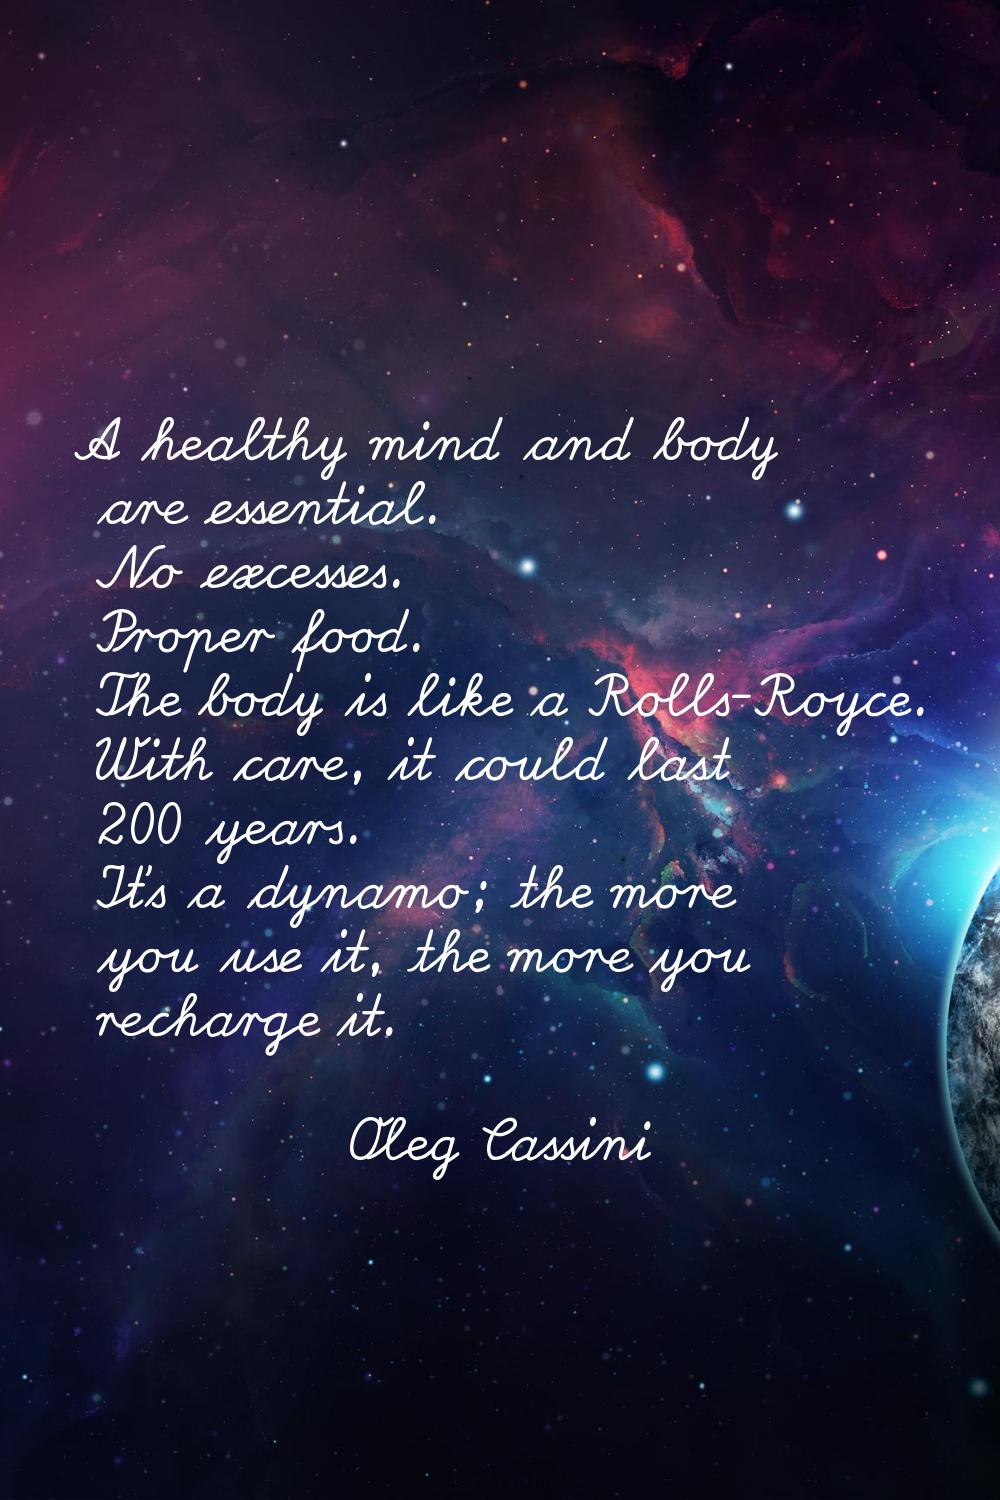 A healthy mind and body are essential. No excesses. Proper food. The body is like a Rolls-Royce. Wi